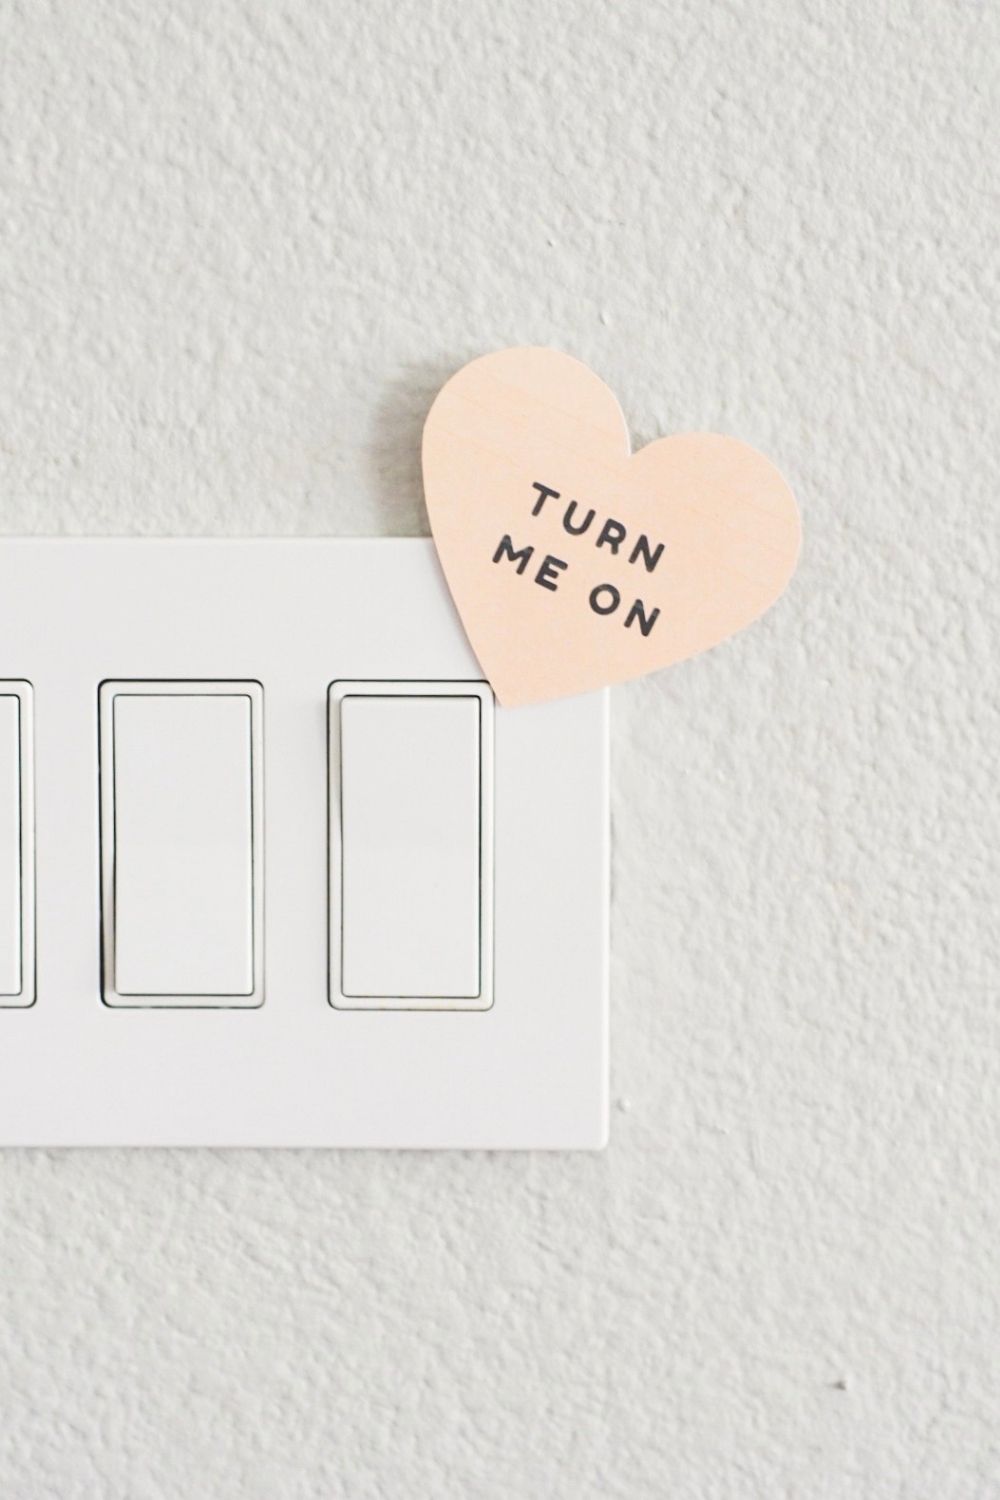 Cute Valentine's Day Pun Cards to Decorate Your Home